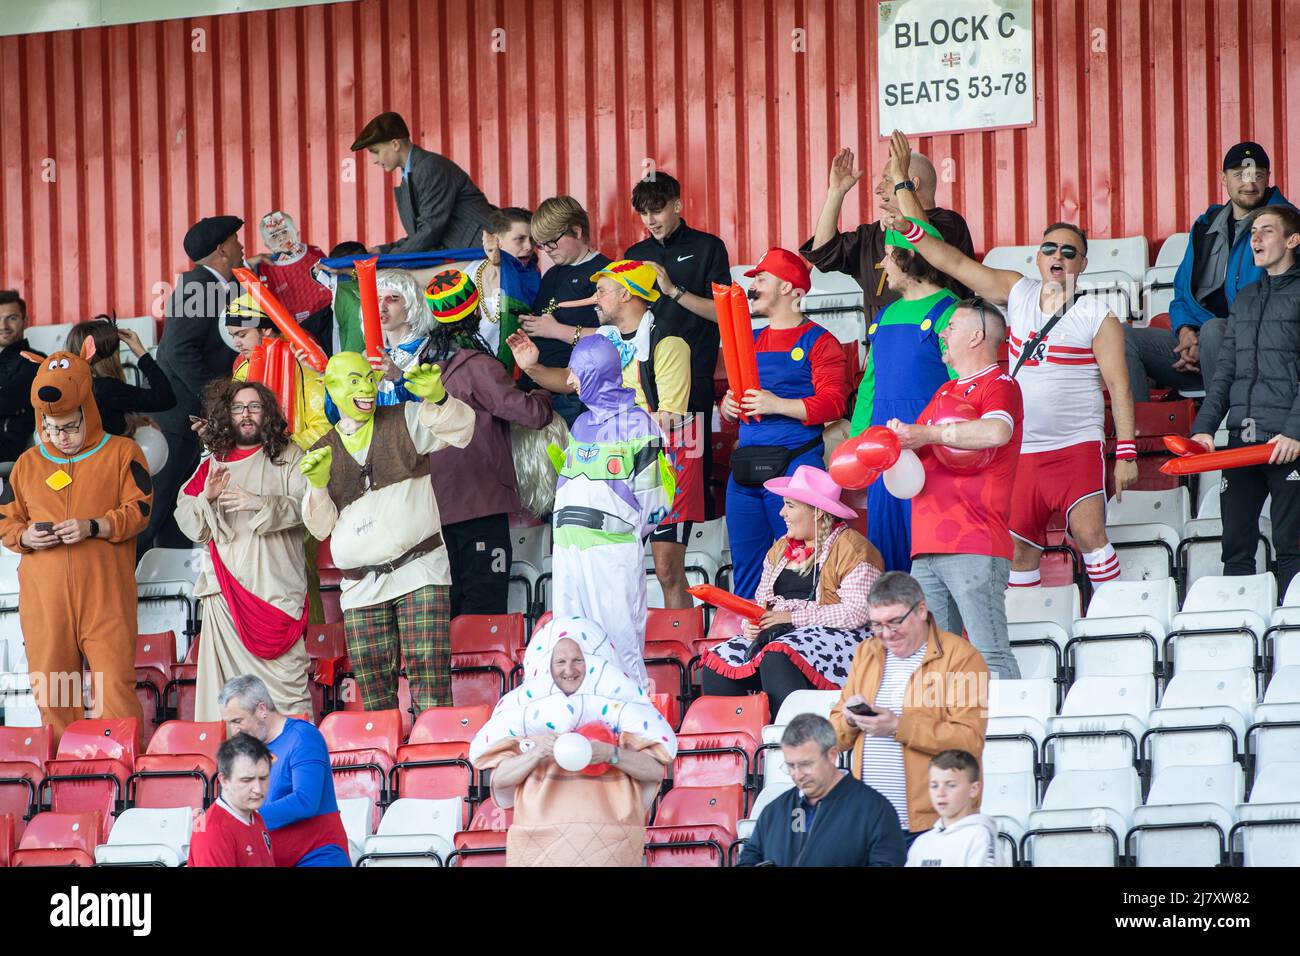 English football fans dressed up in fancy dress on last game of season Stock Photo